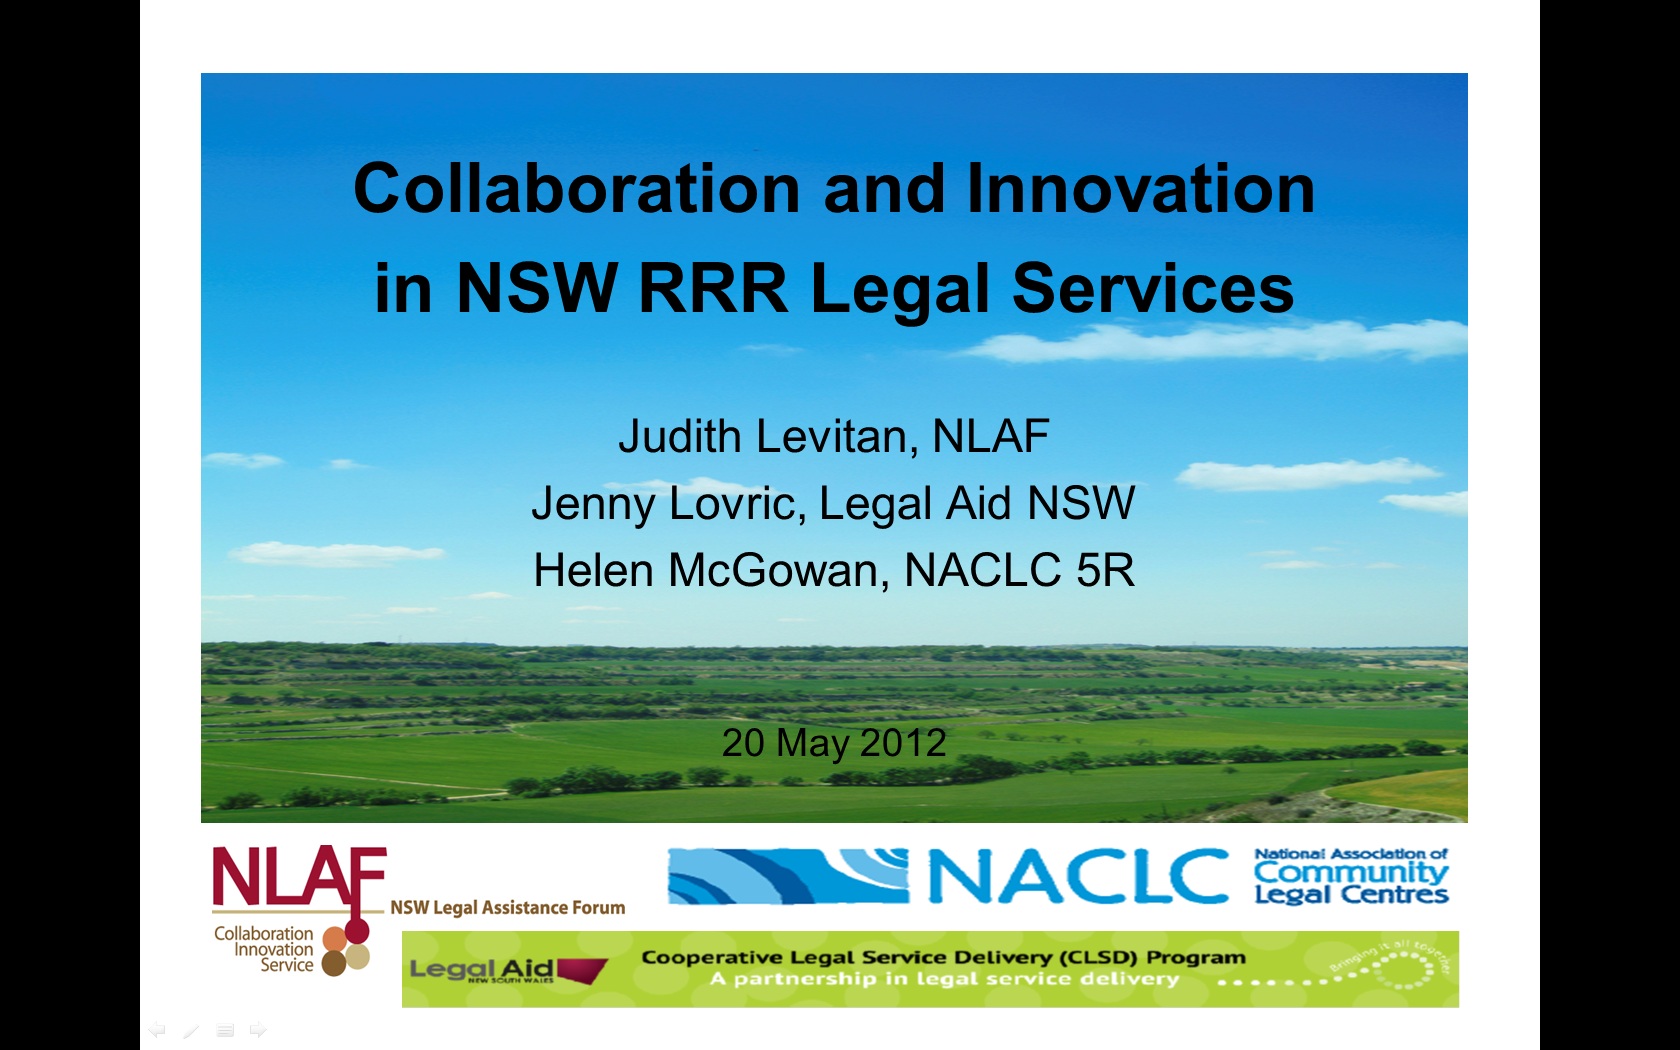 Collaboration and innovation in NSW RRR Legal Services